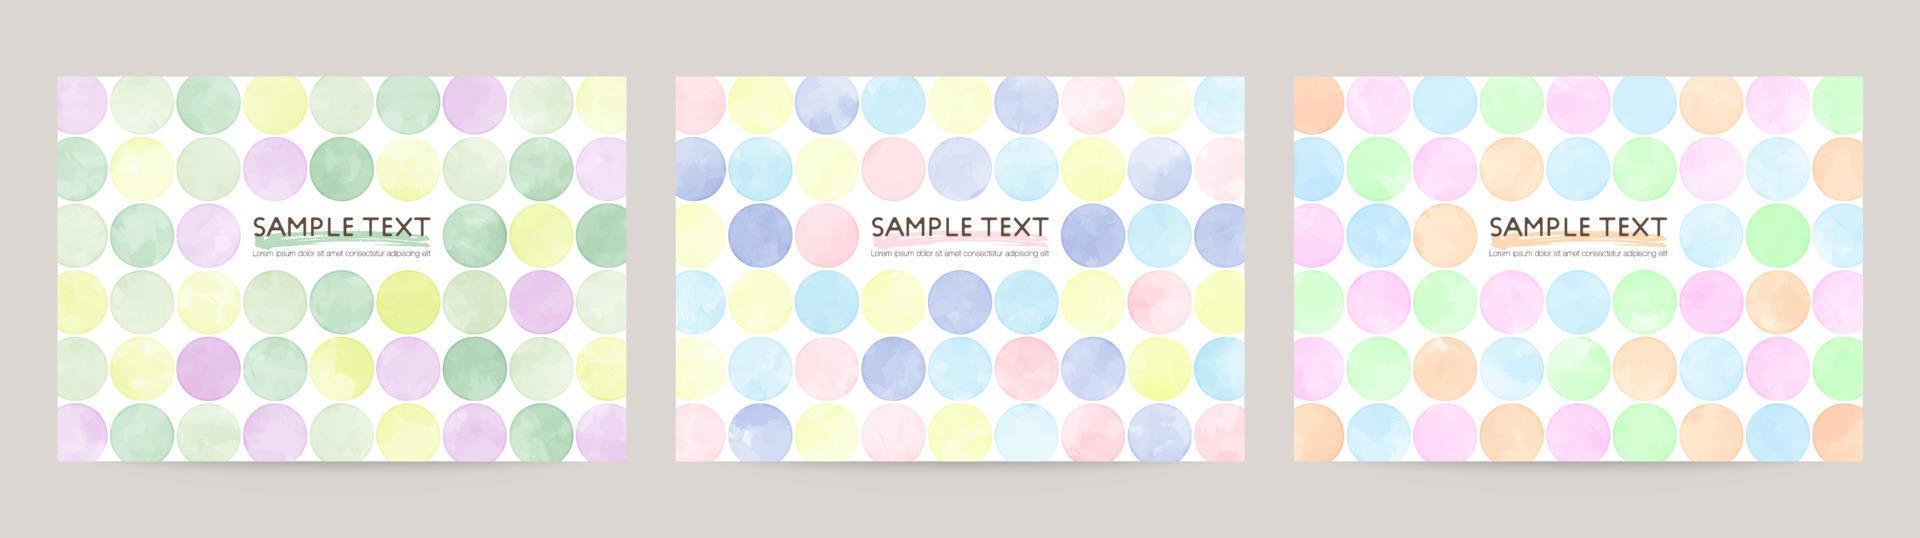 watercolor dot vector colorful background